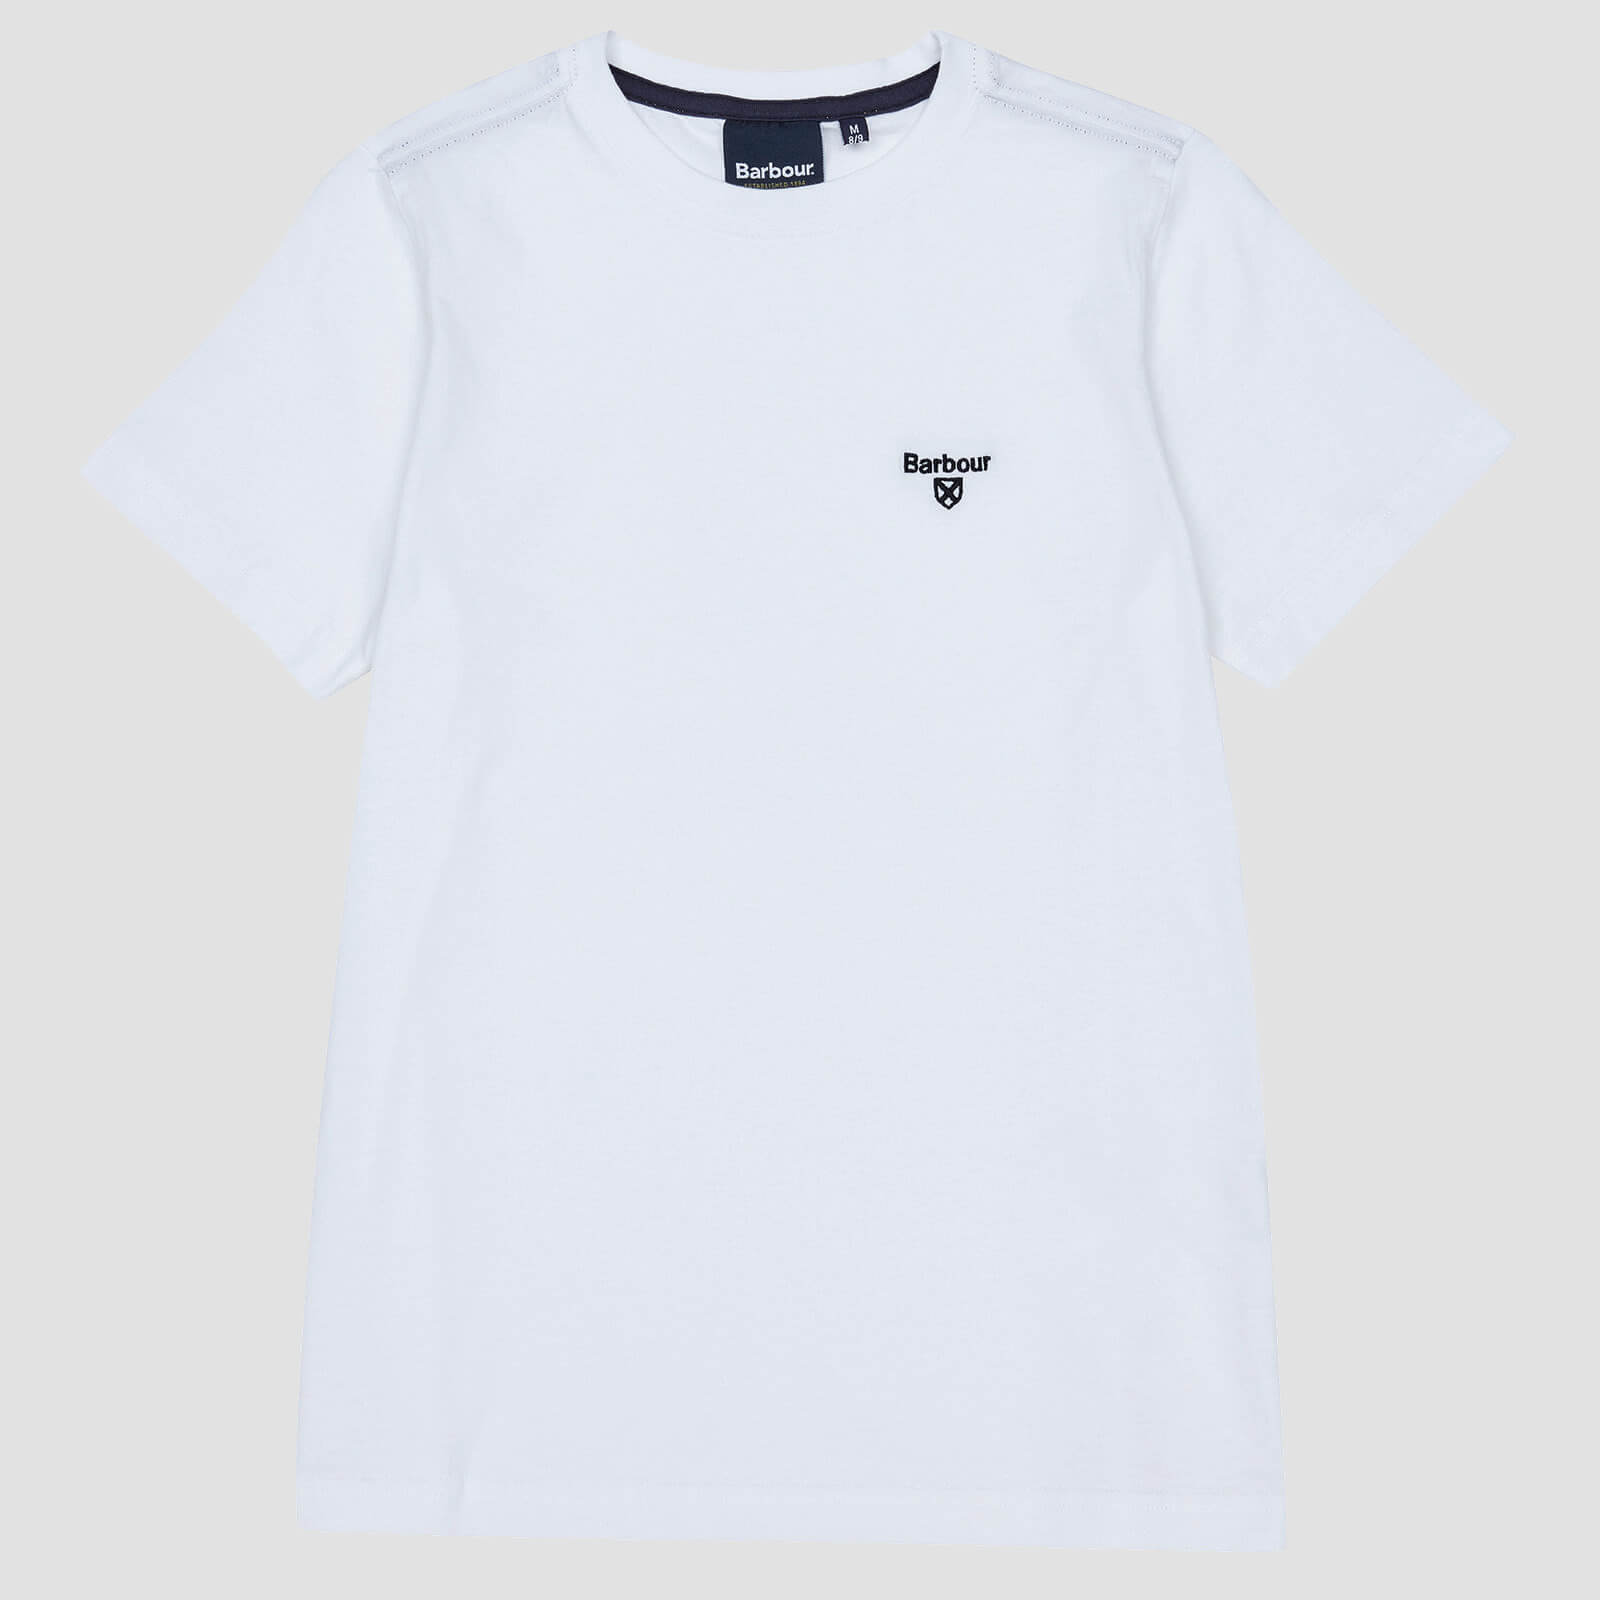 Barbour Boys' Small Logo T-Shirt - White - S (6-7 Years)